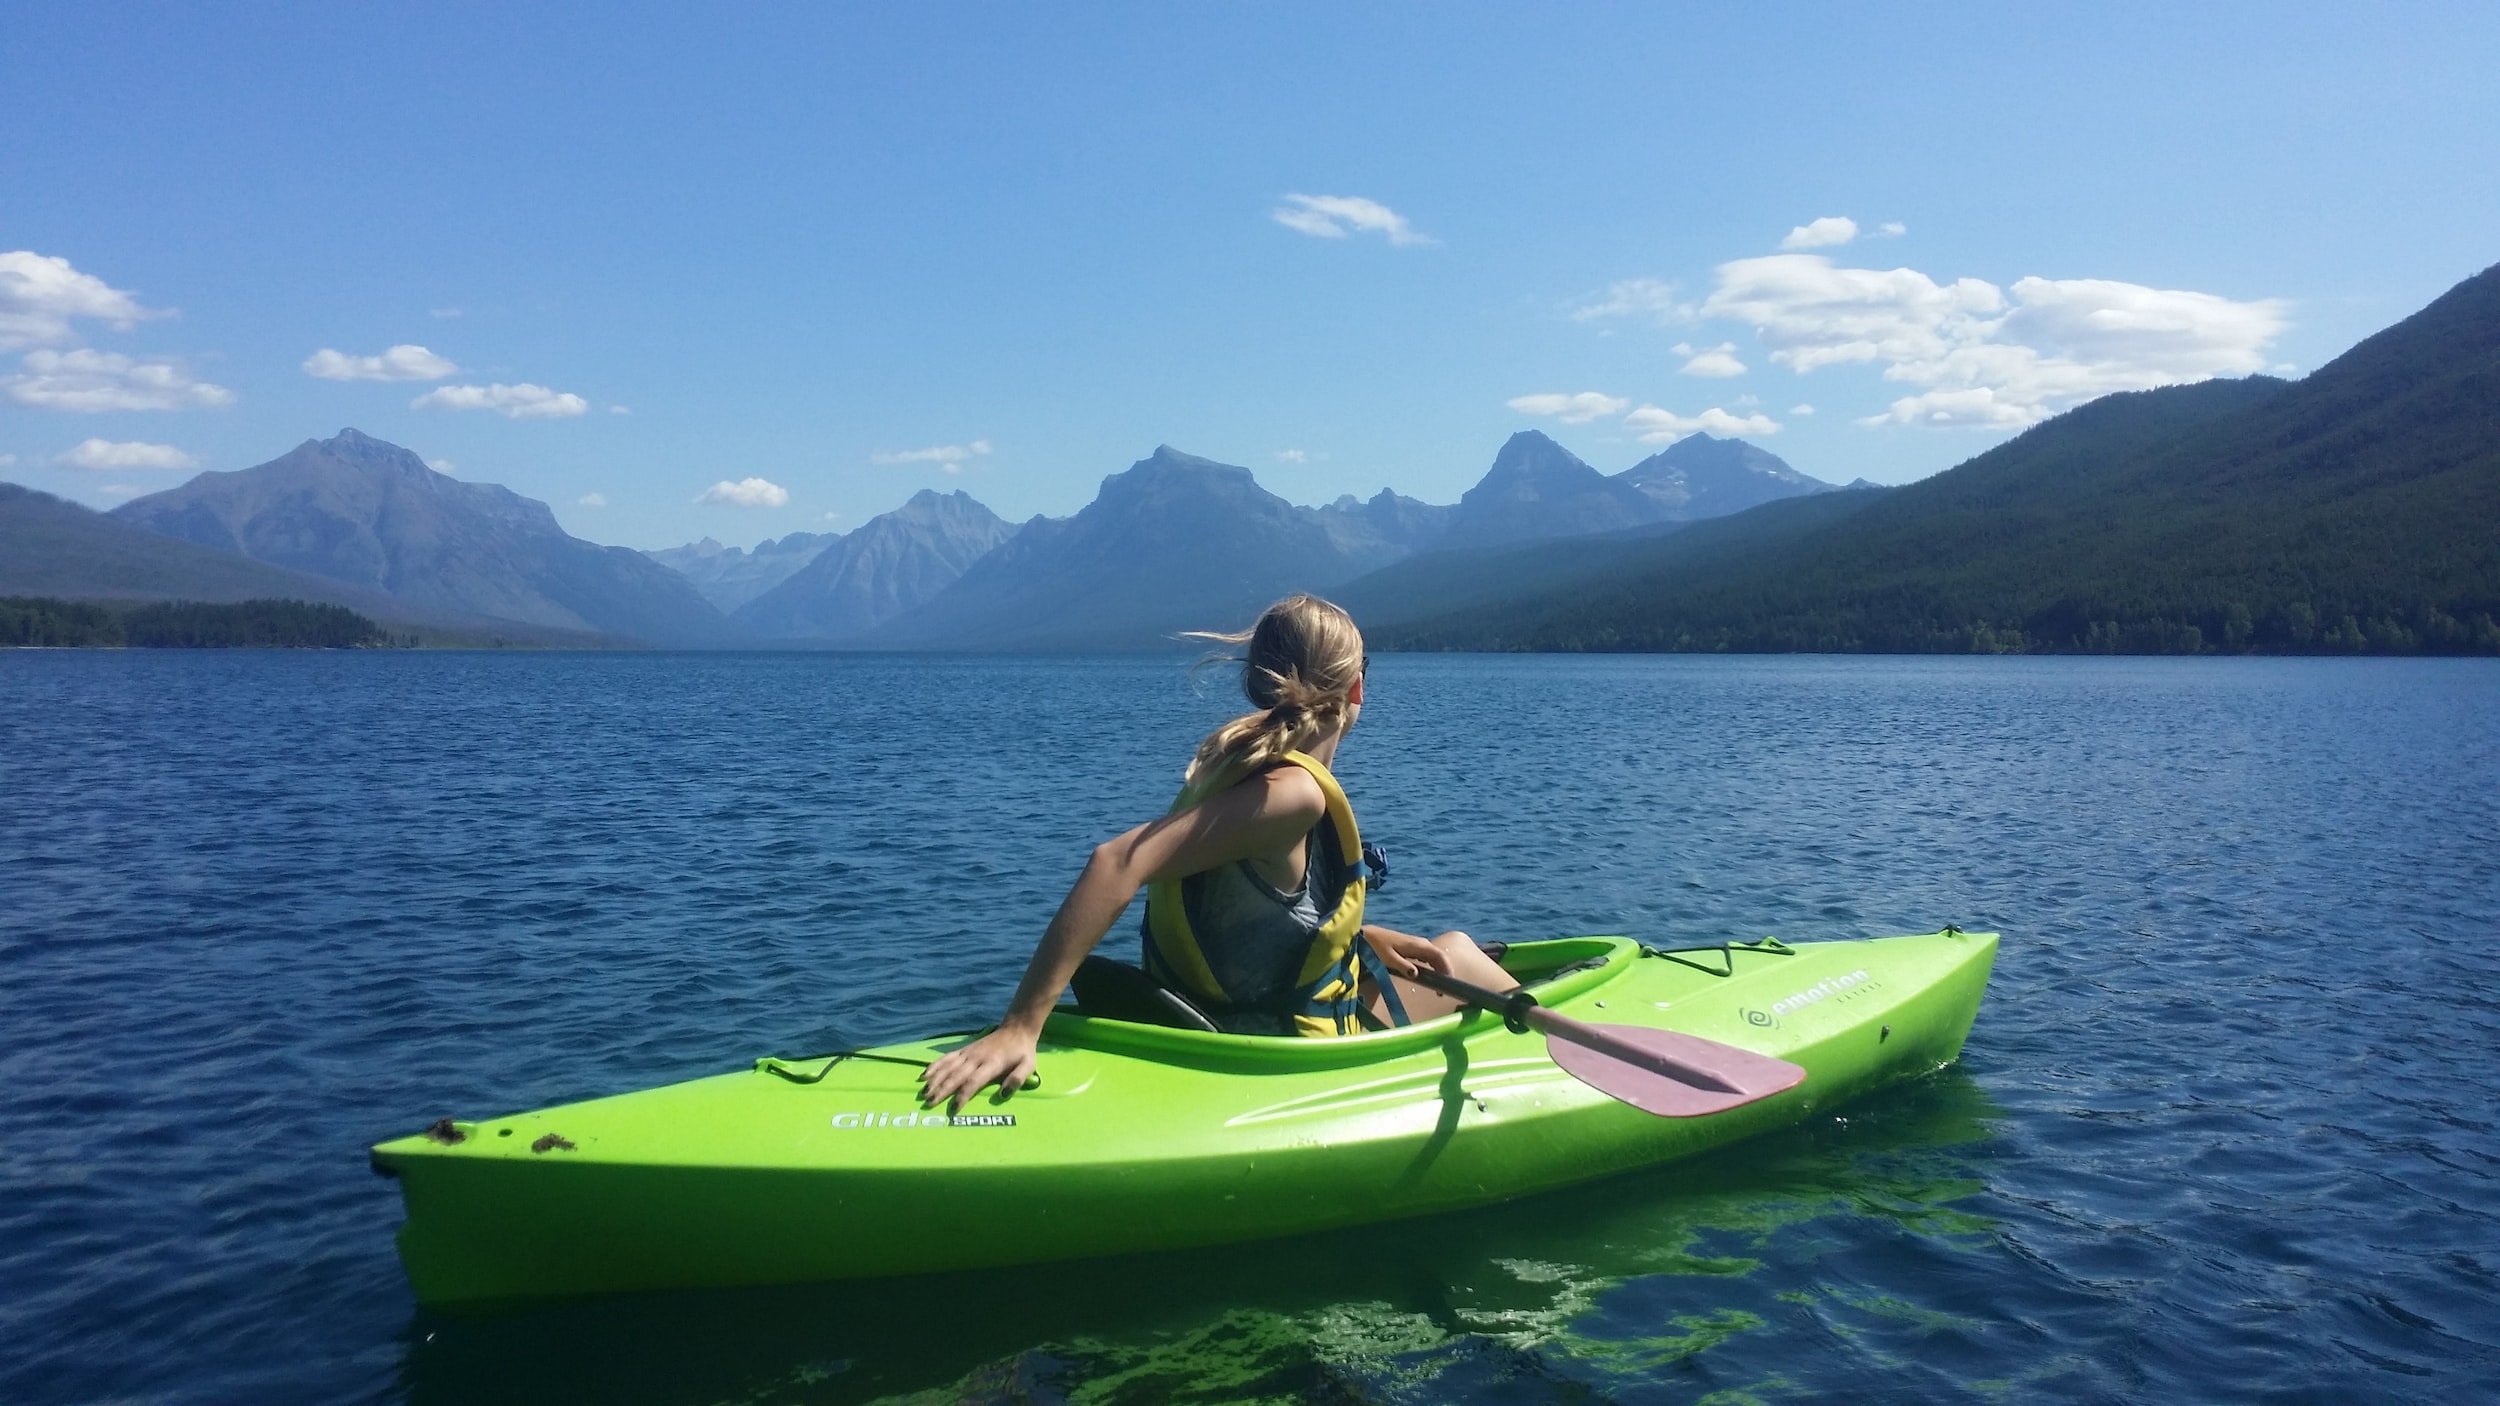 Best Accessories for Kayaking – Here's What You Need